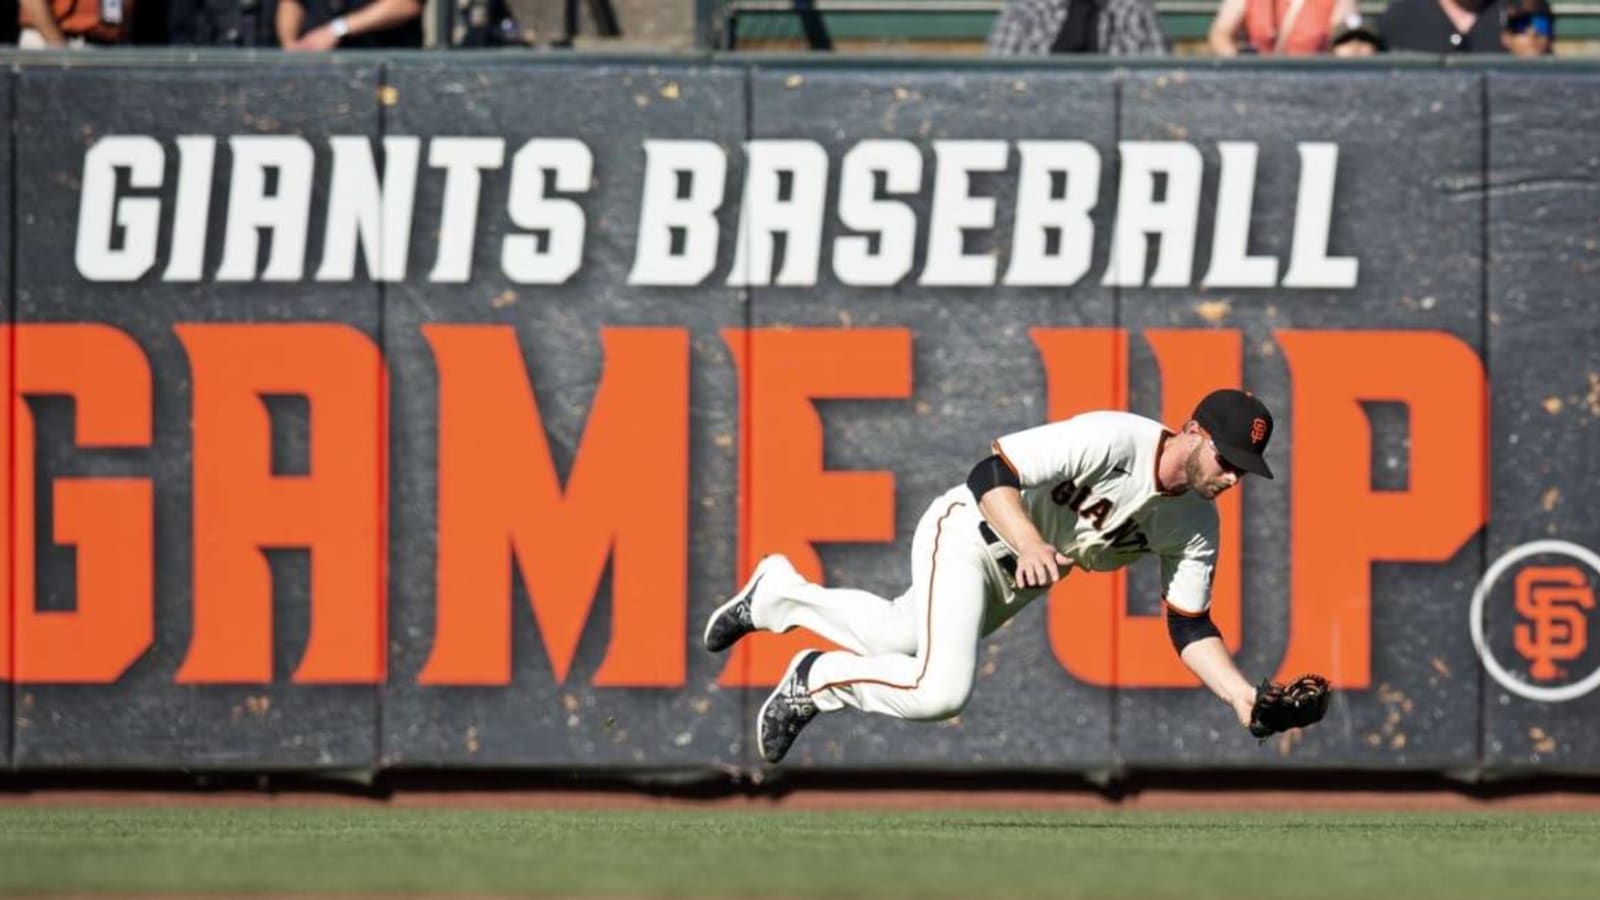 Watch: Austin Slater Makes Game-Saving Sliding Catch in Giants 6-3 Win